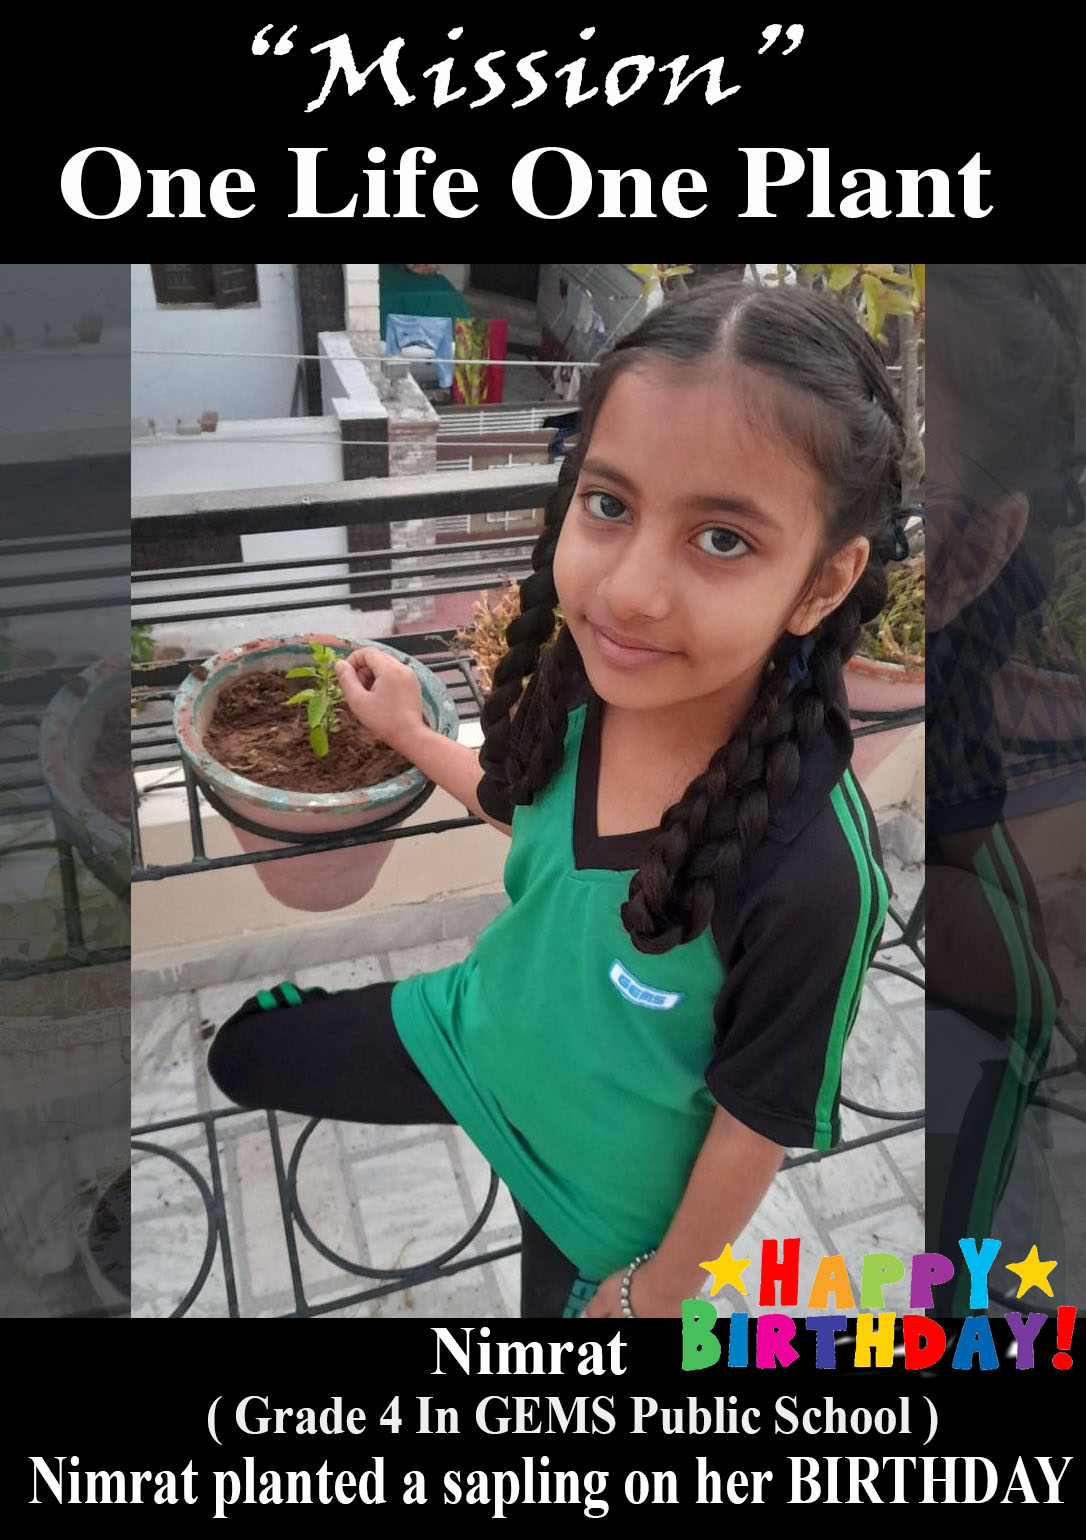 Mission “One Life One Plant” Nimrat of grade 4 planted a sapling on her BIRTHDAY